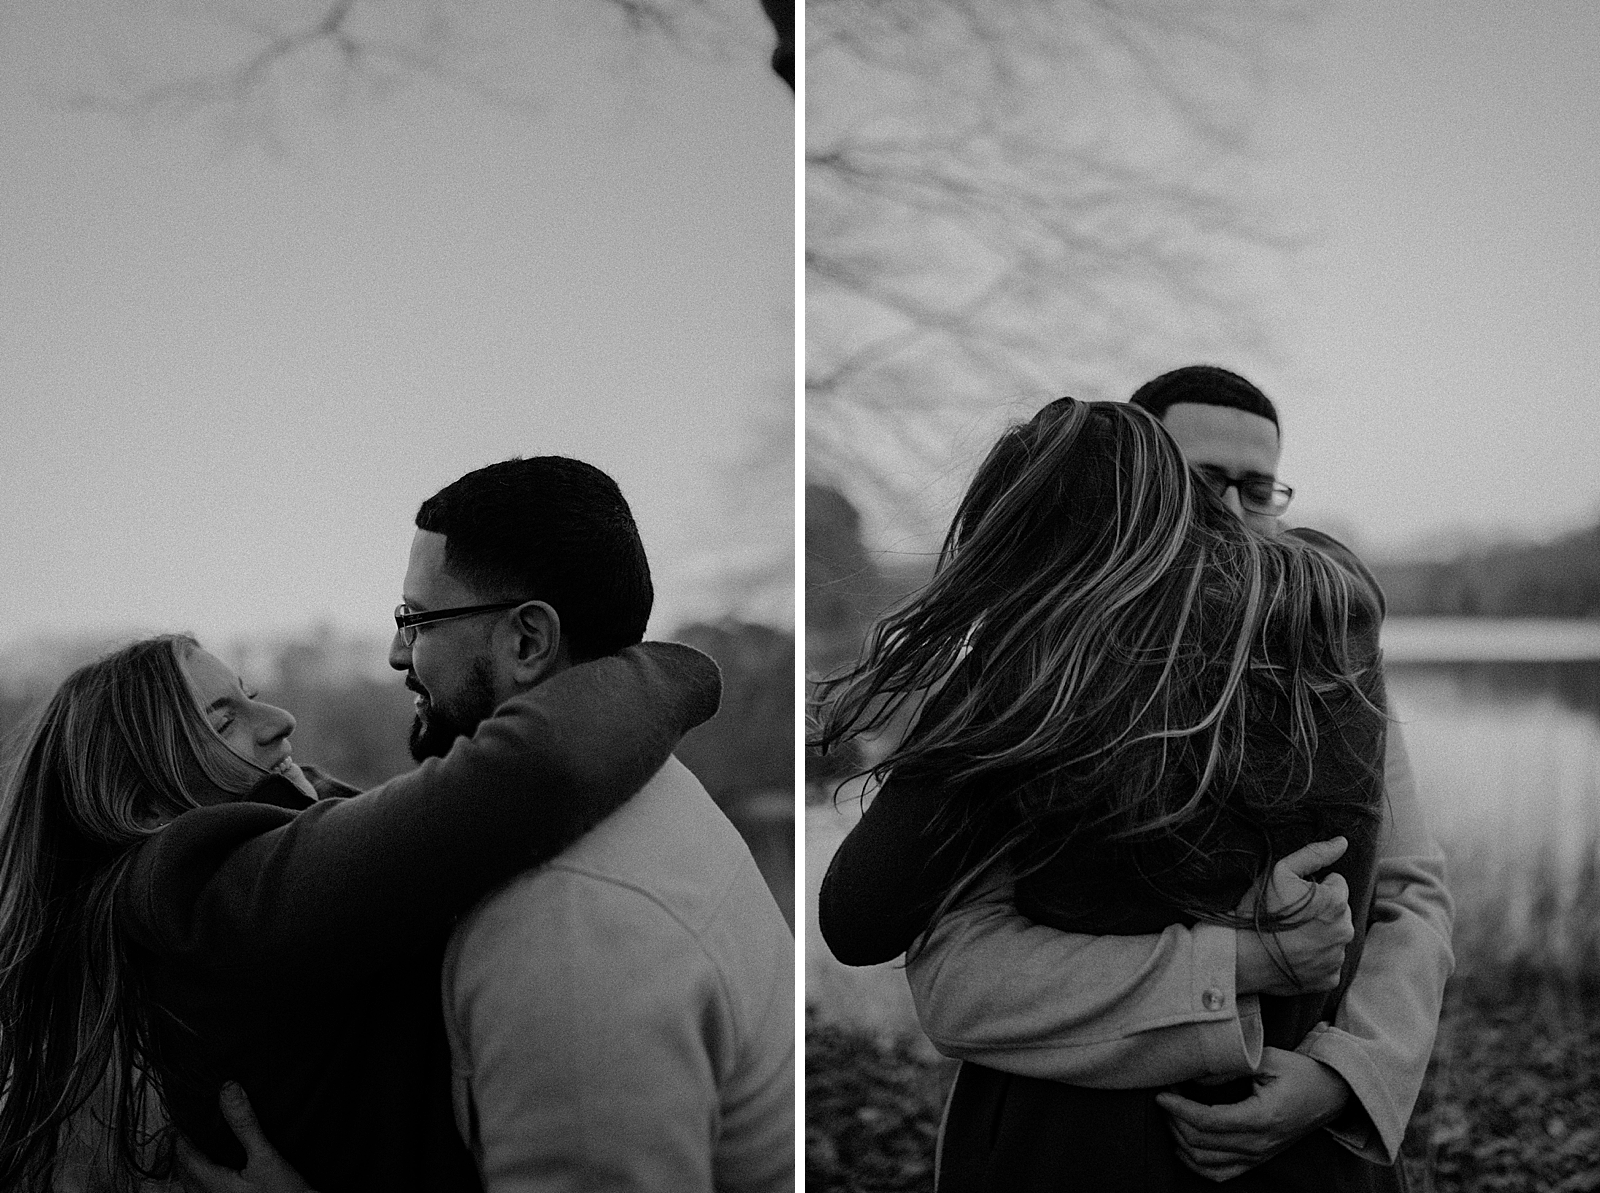 B&W Couple hugging each other in the forest